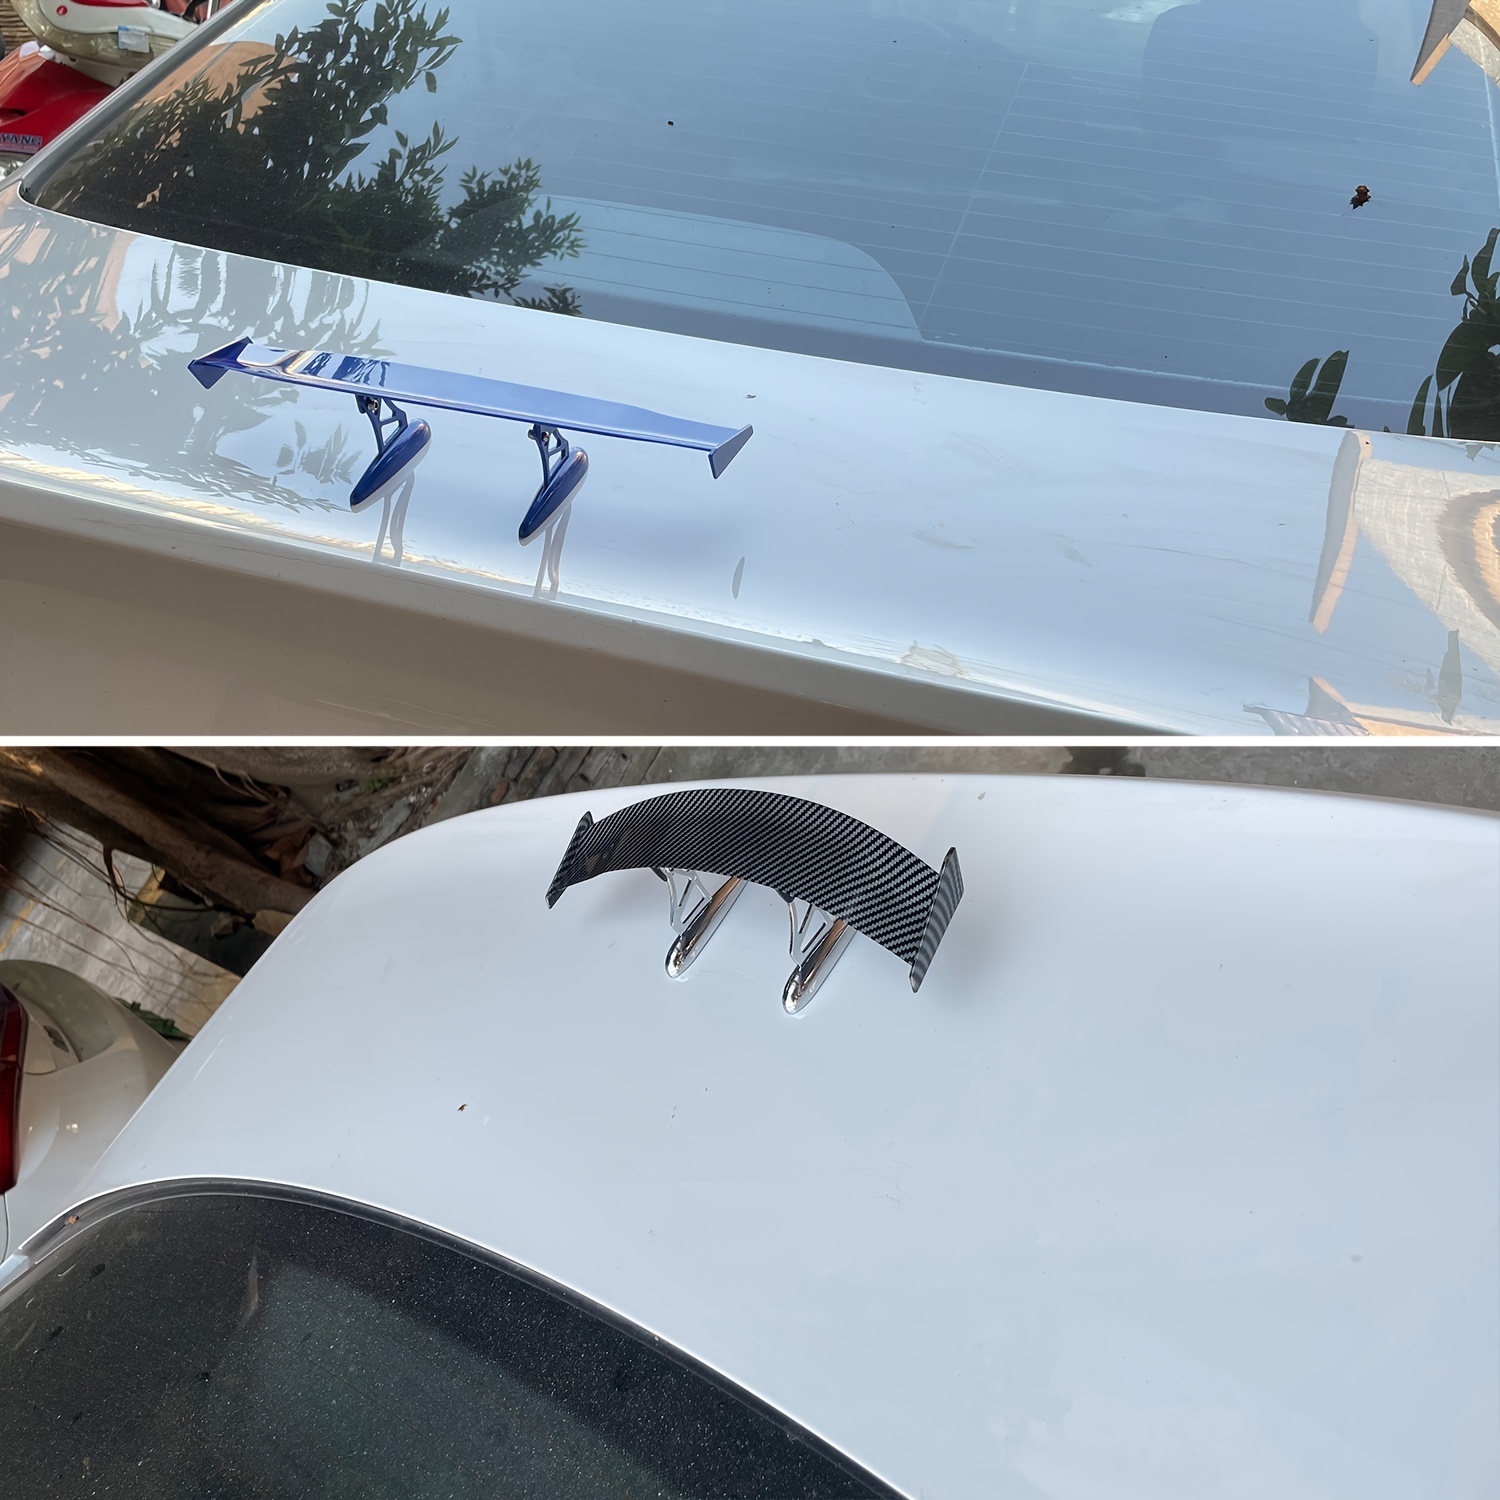 Upgrade Your Car's Look With This Stylish Mini Spoiler Wing Decal